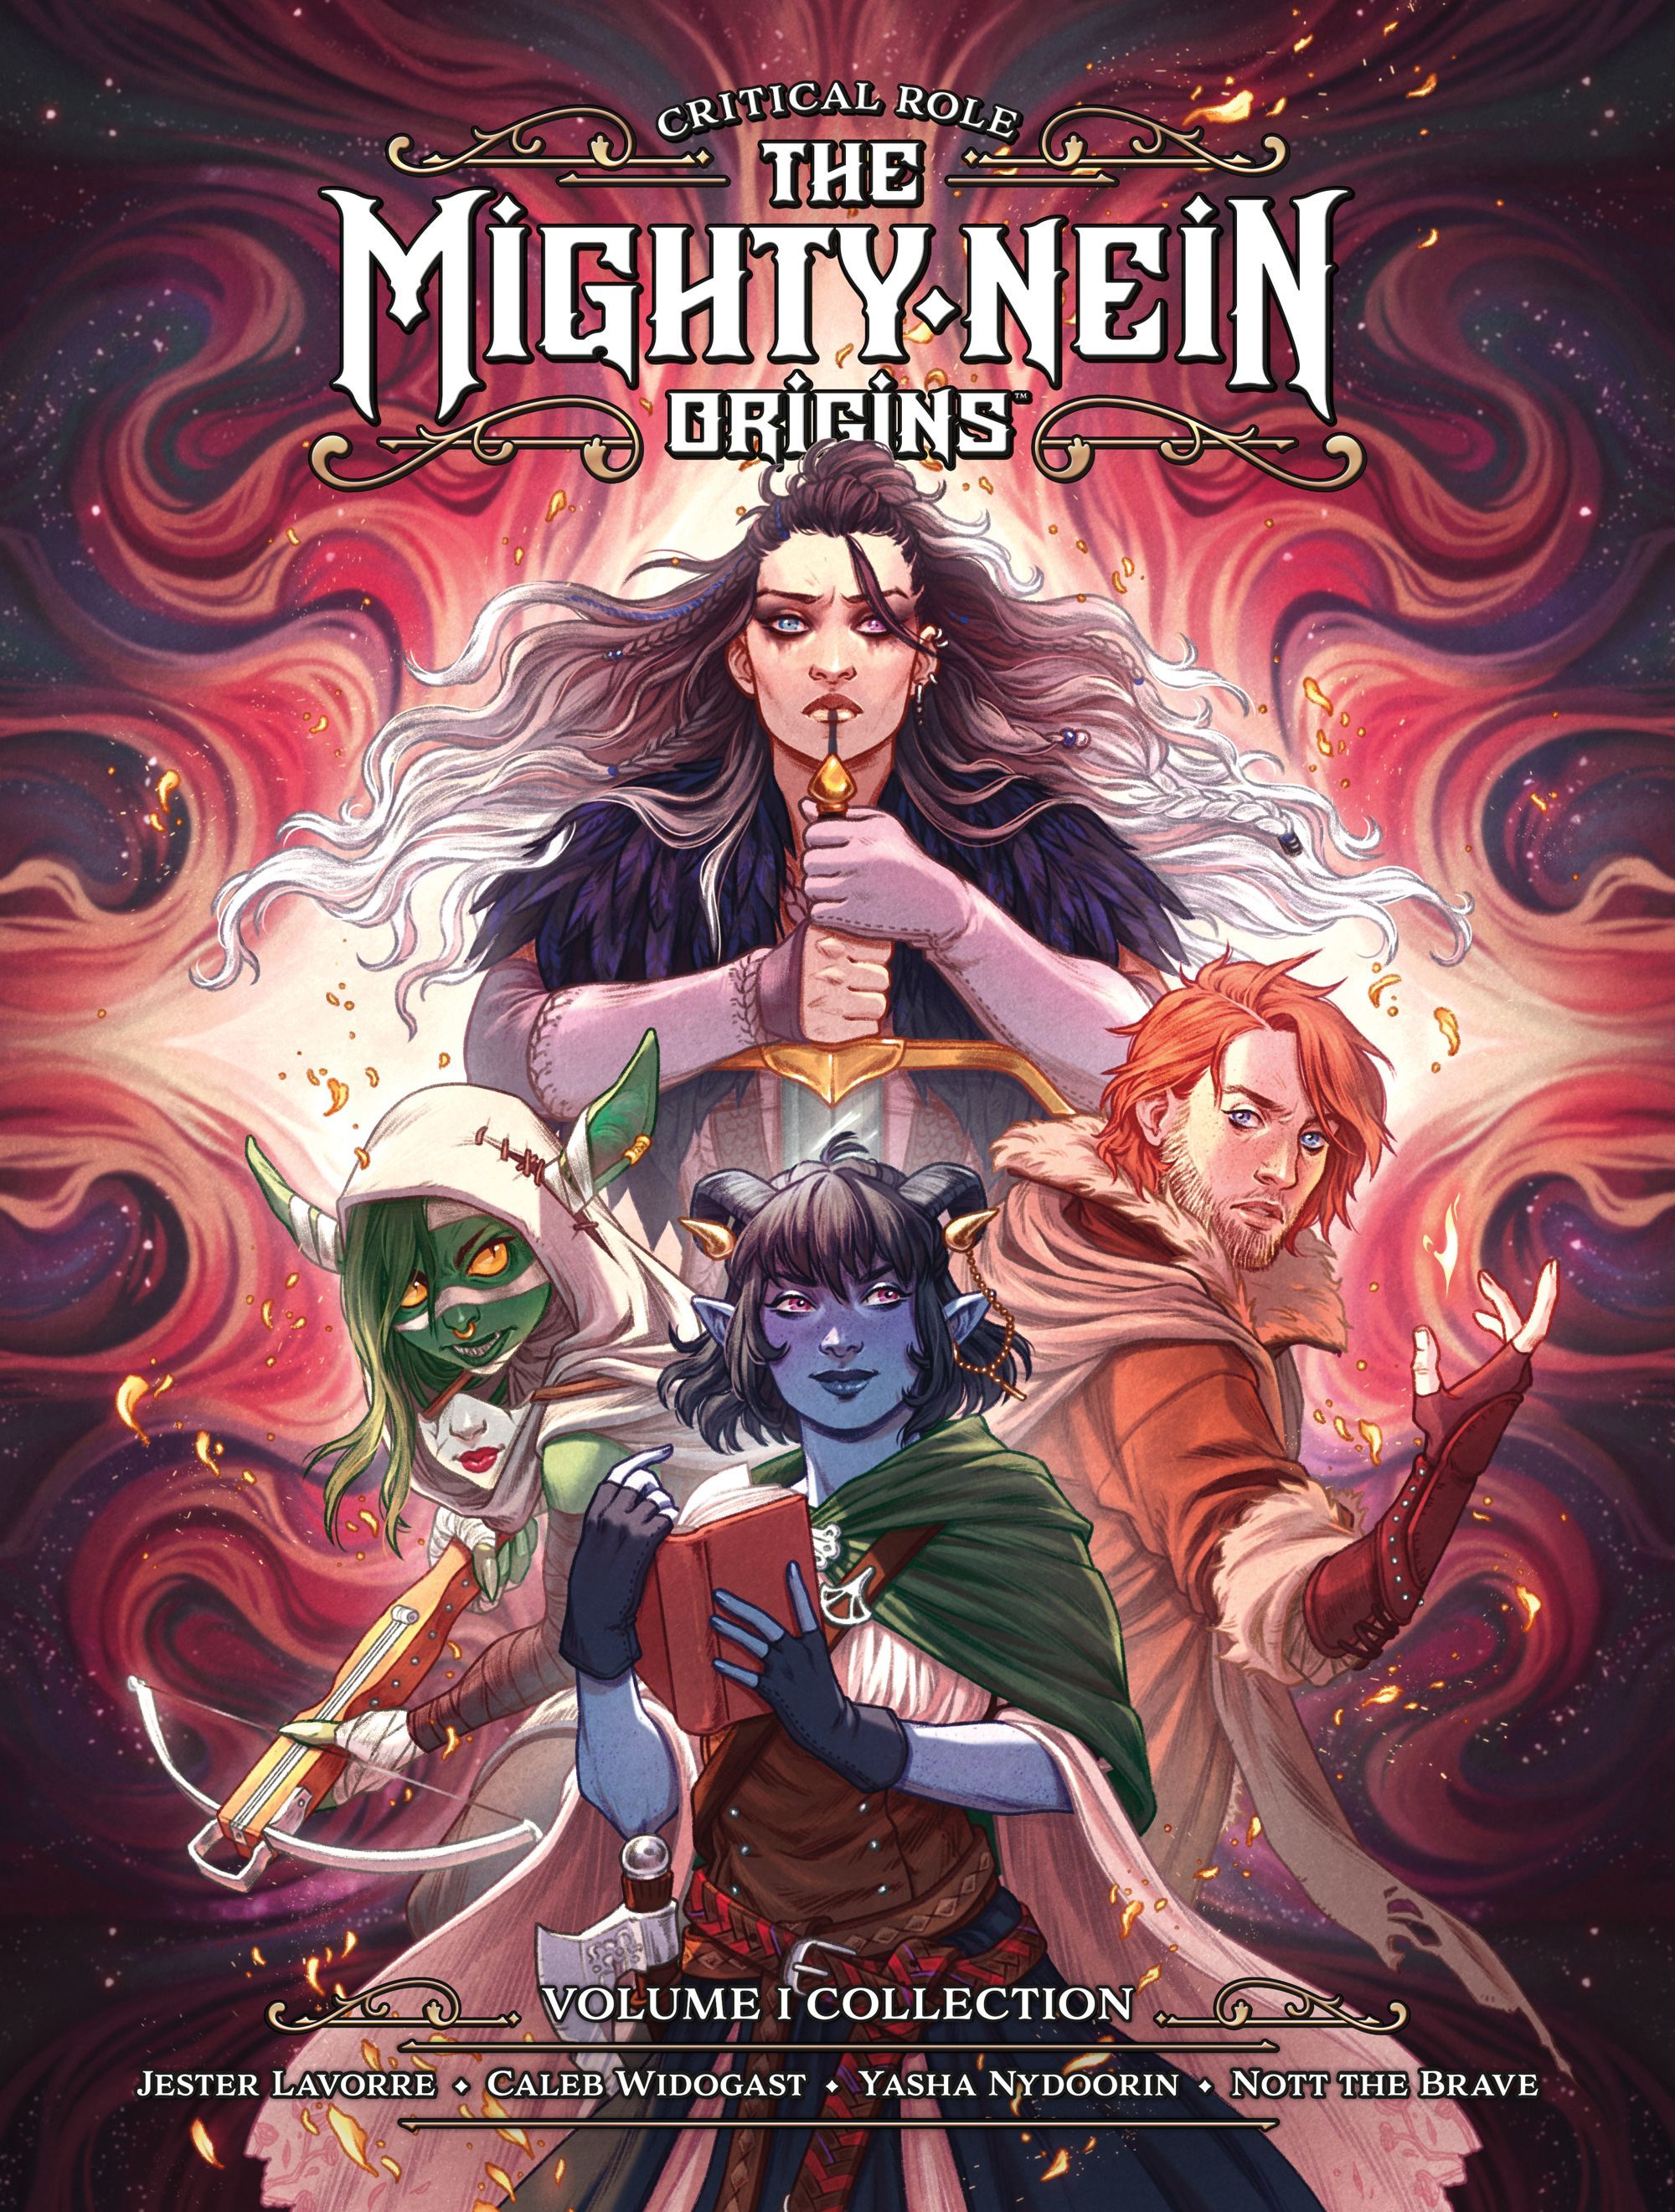 New Critical Role: The Mighty Nein Collection Coming From Dark Horse